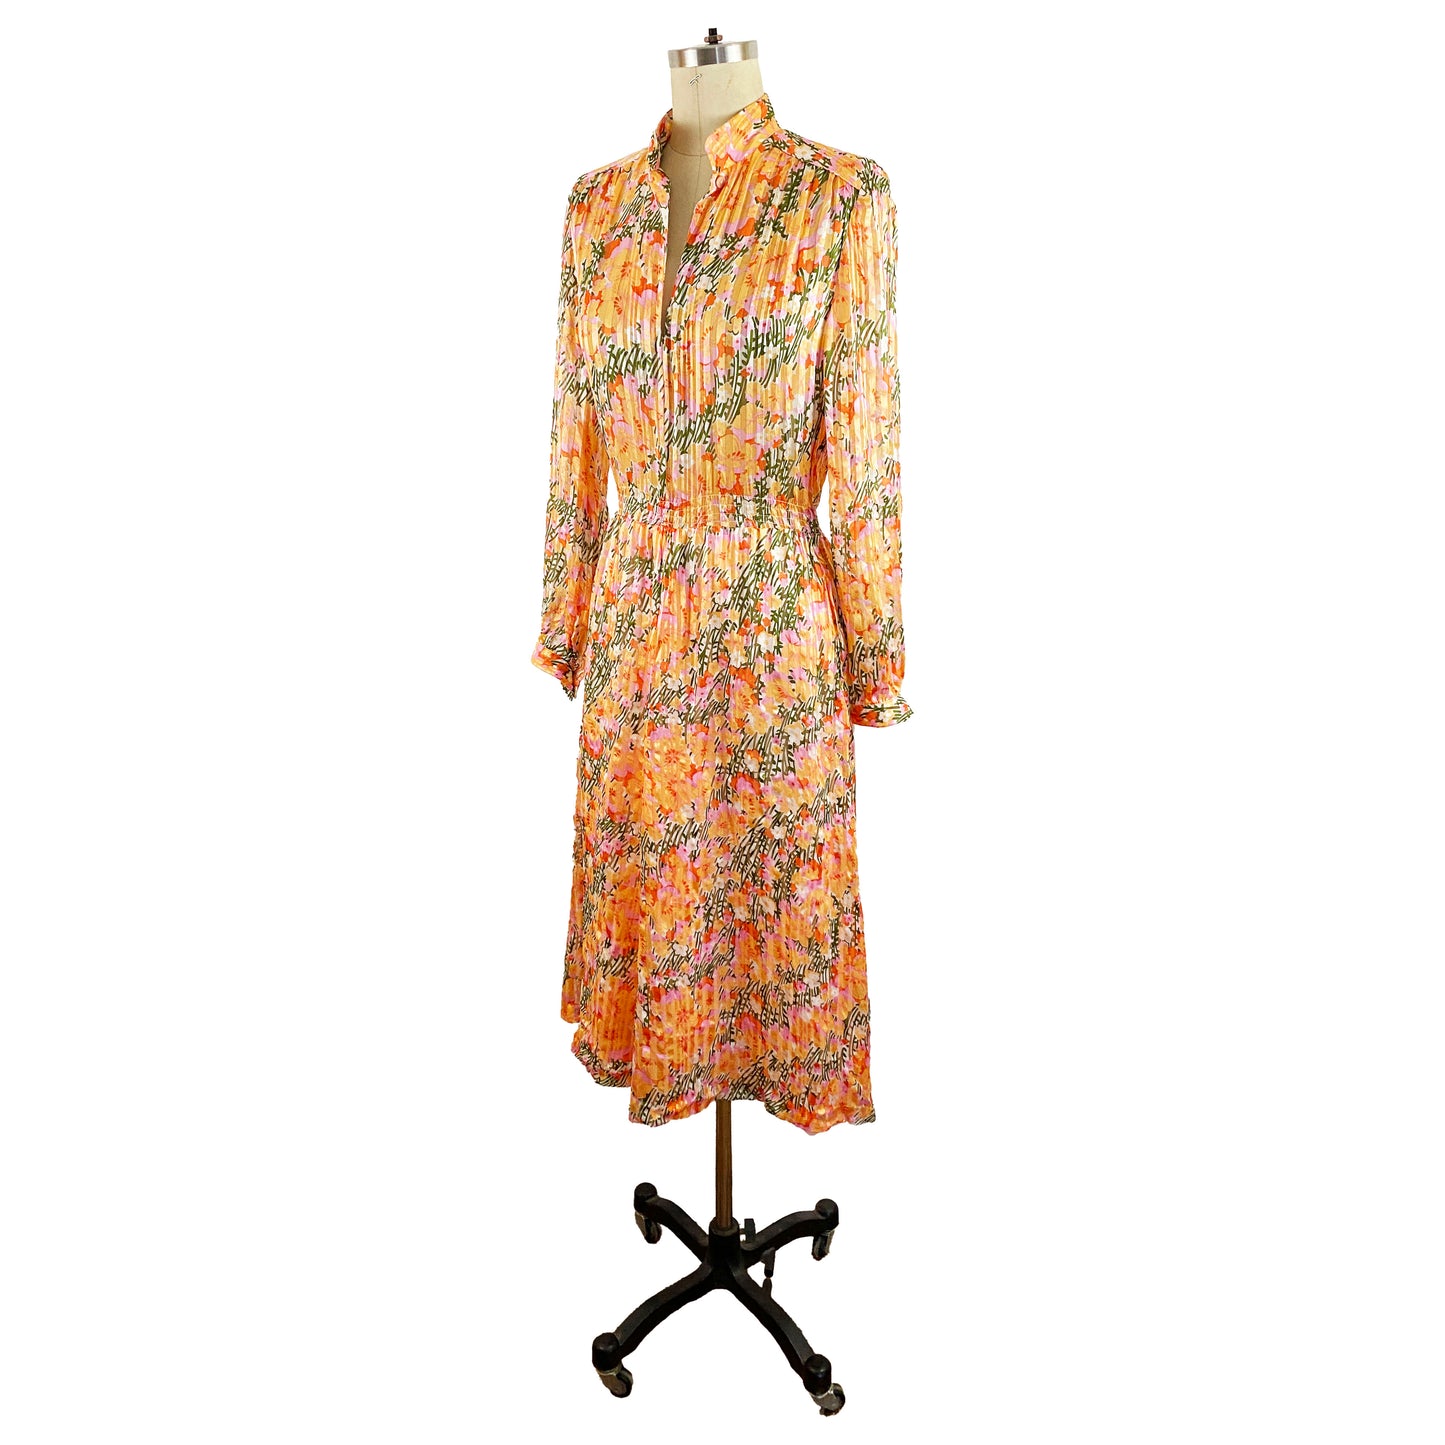 1980s John Hagarty Peach Floral Silk Striped Sheer Long Sleeve Dress Made in Ireland / Size Small